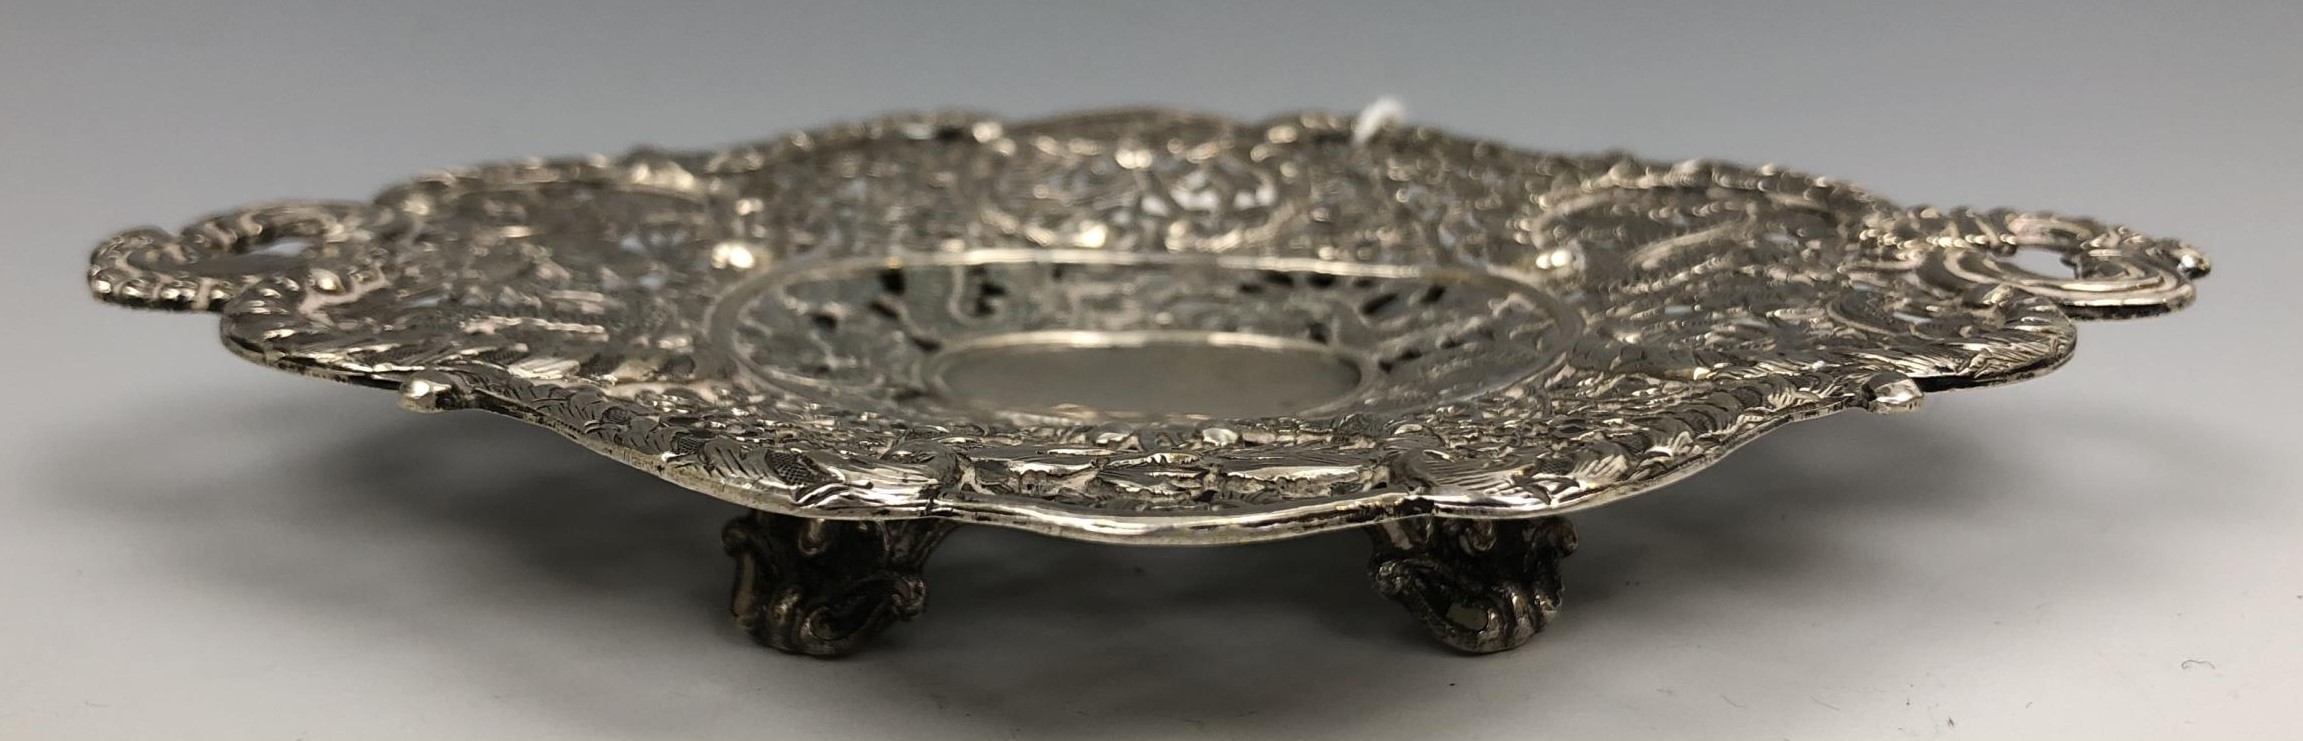 A Chinese silver coloured metal dish, embossed and pierced prunus and dragons, 15.5 cm wide 3.1 ozt - Image 2 of 4